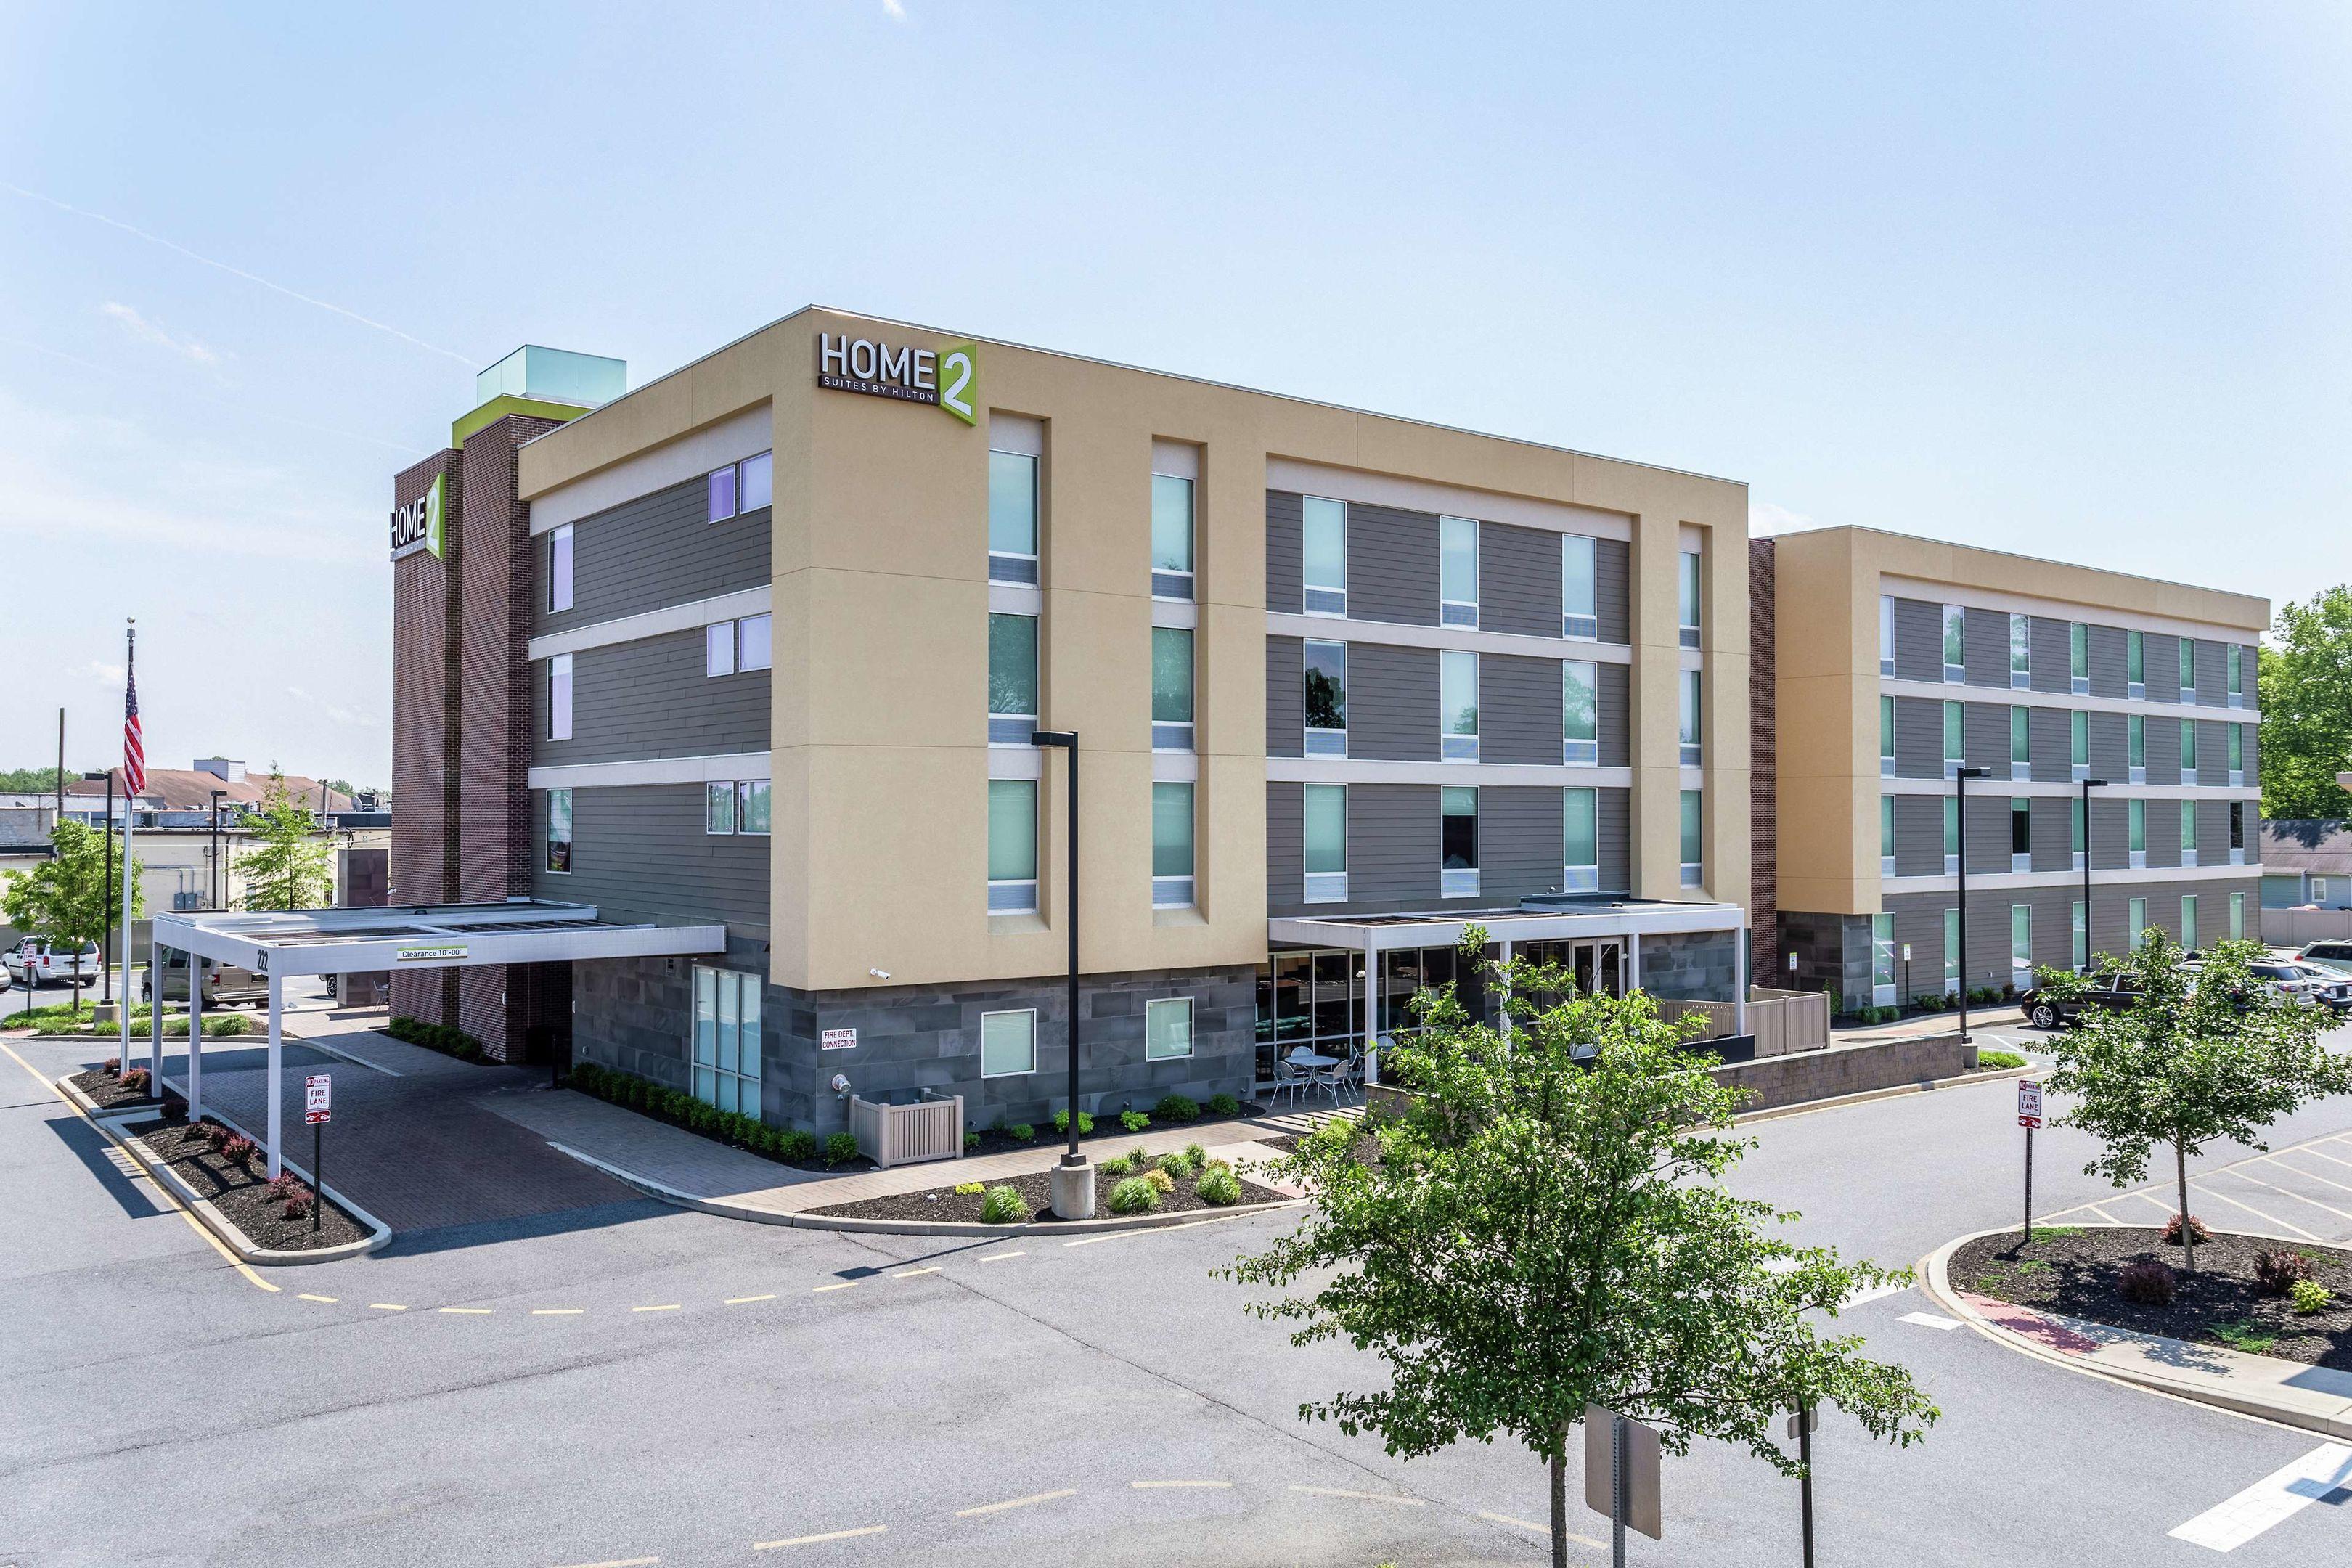 Home2 Suites by Hilton Dover